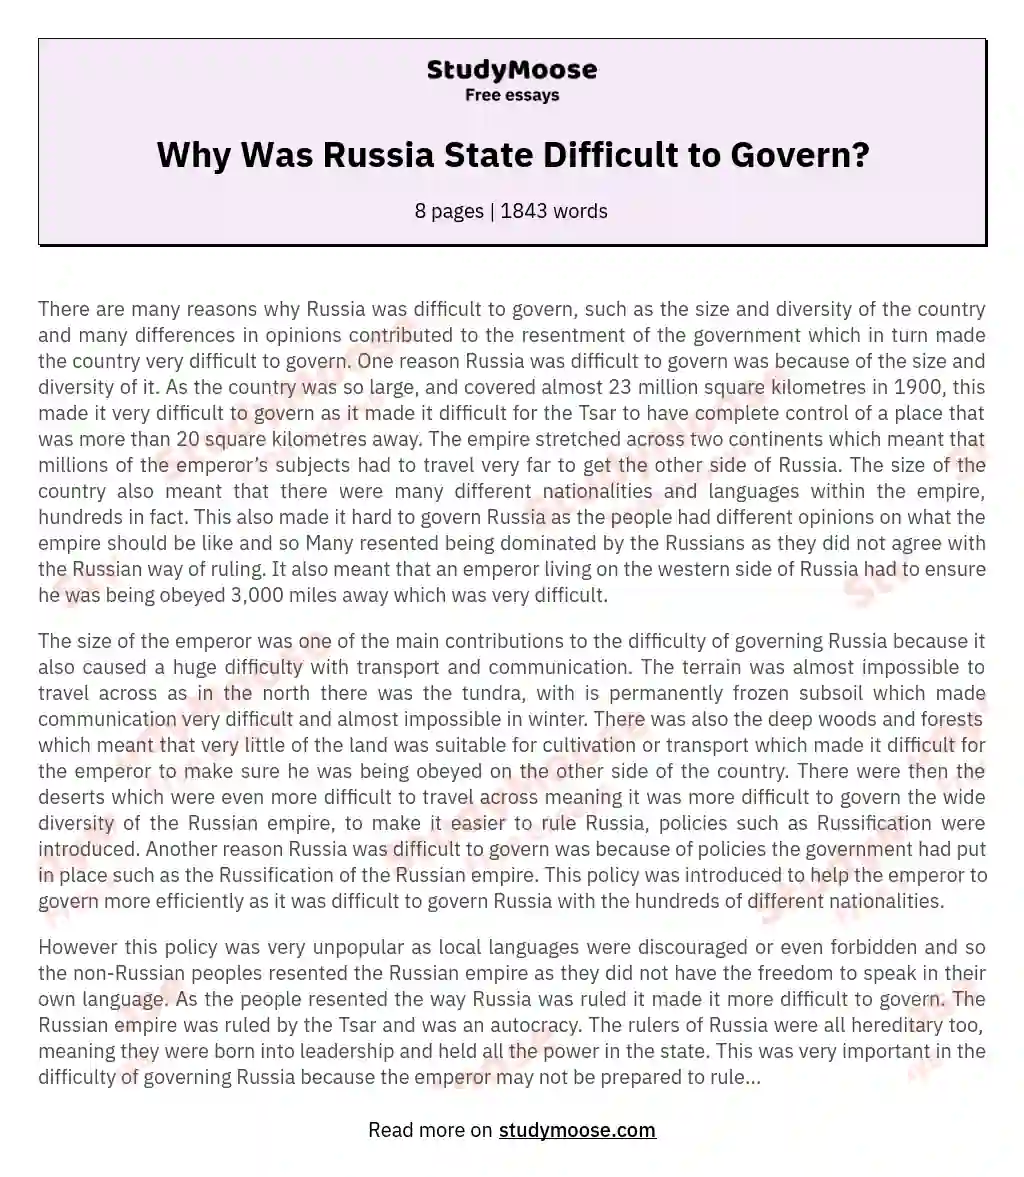 Why Was Russia State Difficult to Govern? essay